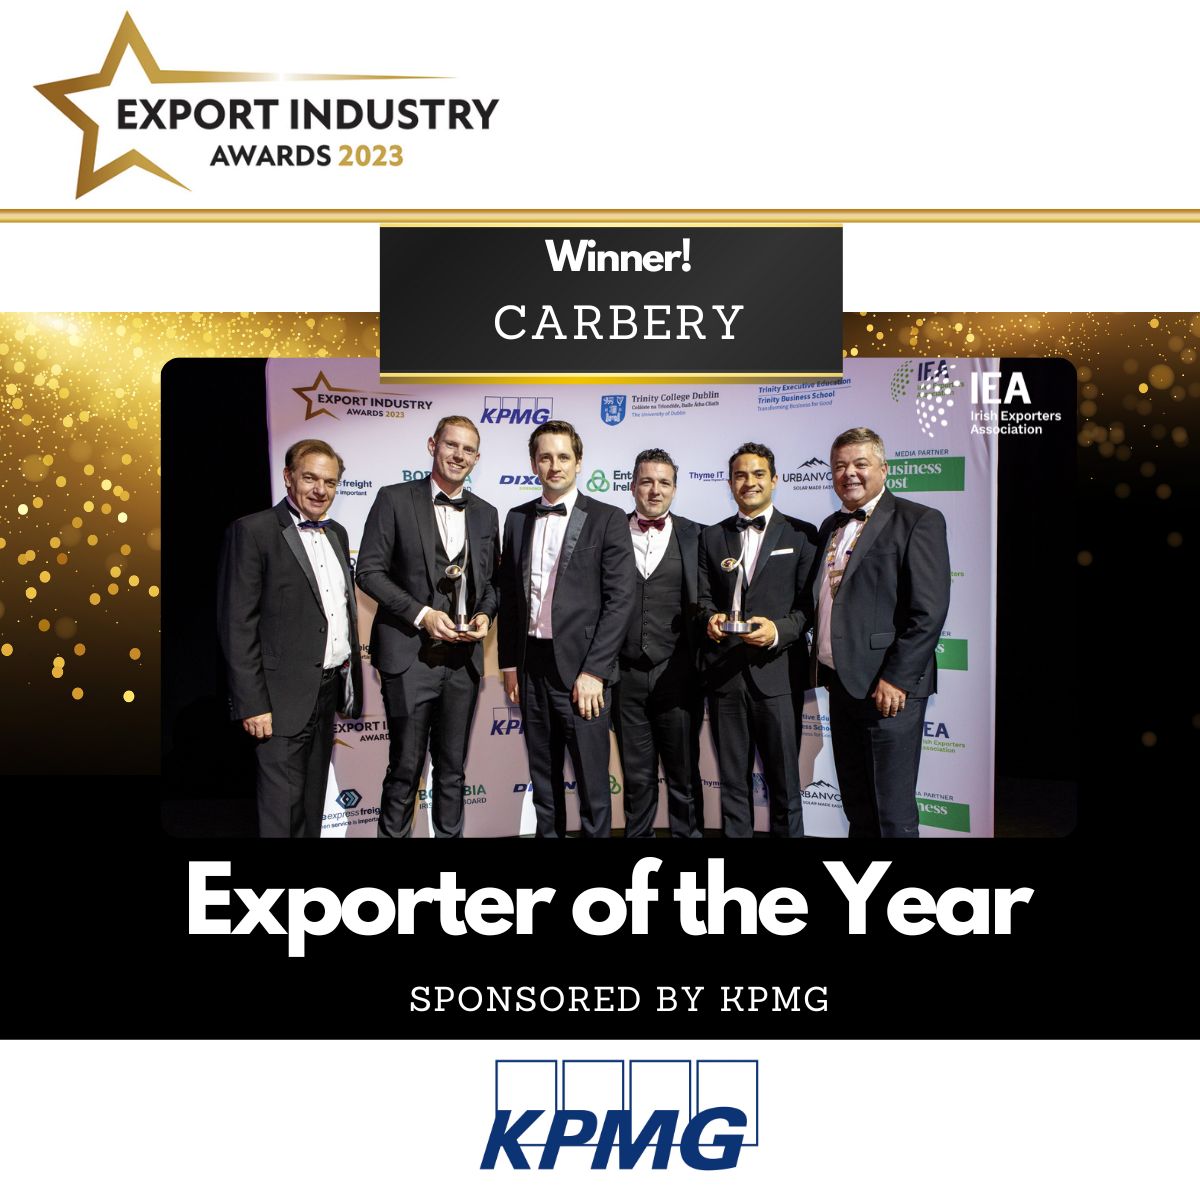 Congratulations to @CarberyGroup for winning the Exporter of the Year Award at the #2023ExportIndustryAwards sponsored by @KPMG_Ireland🏆 #ExportExcellence